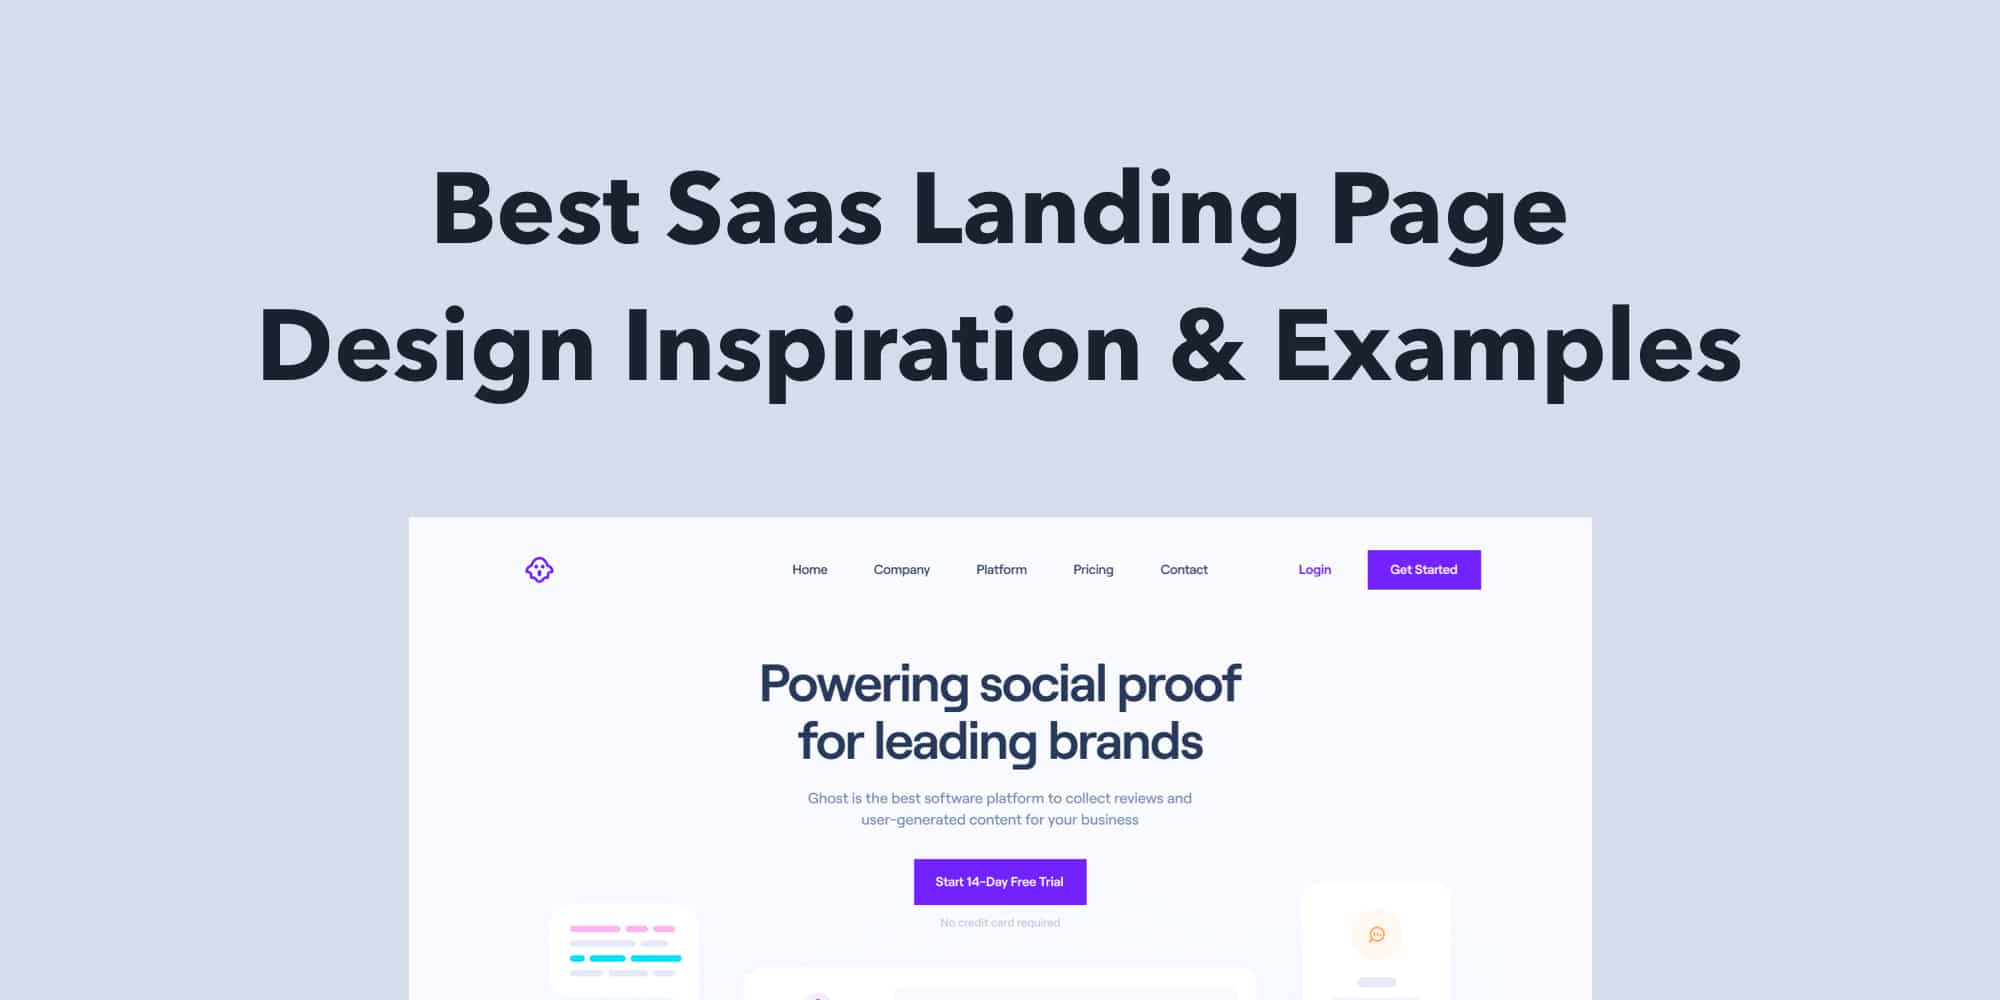 Best Saas Landing Page Design Inspiration & Examples